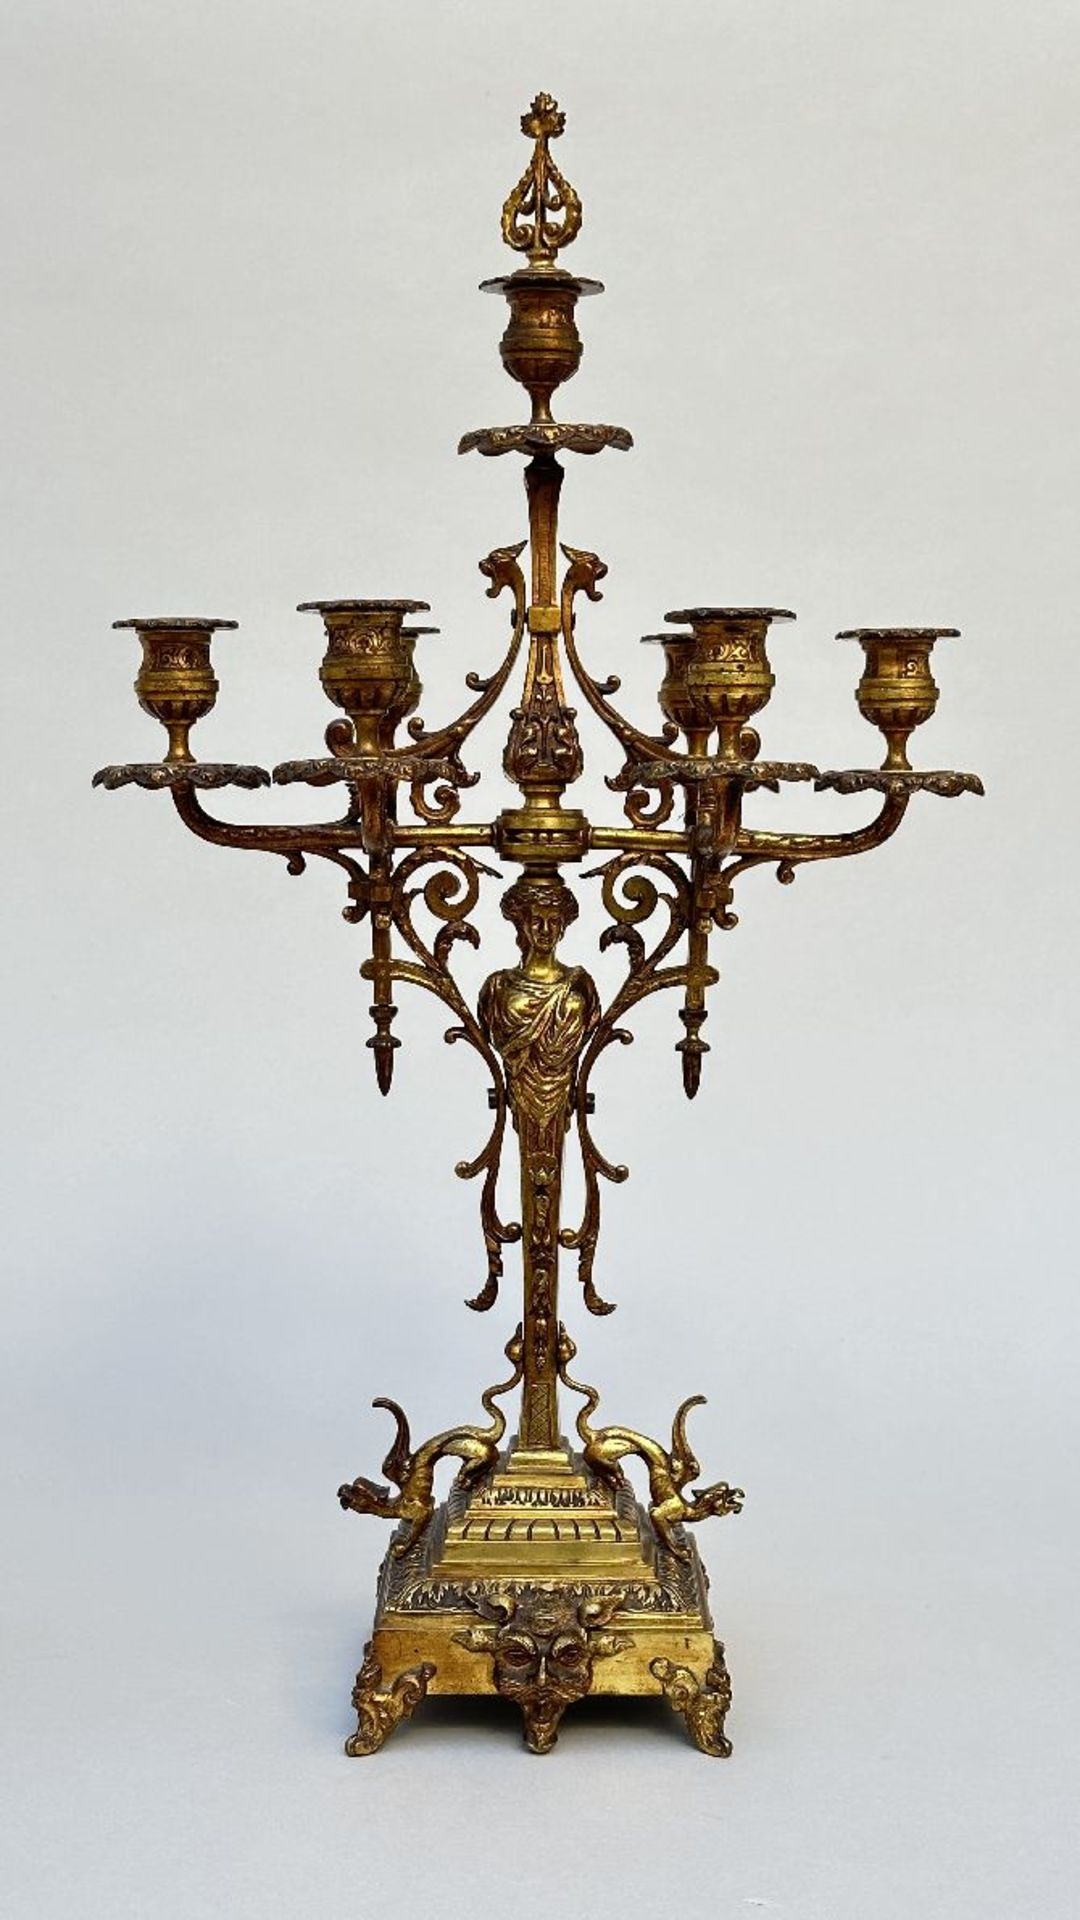 A three-piece mantelpiece in gilded bronze, Henri II style - Image 3 of 5